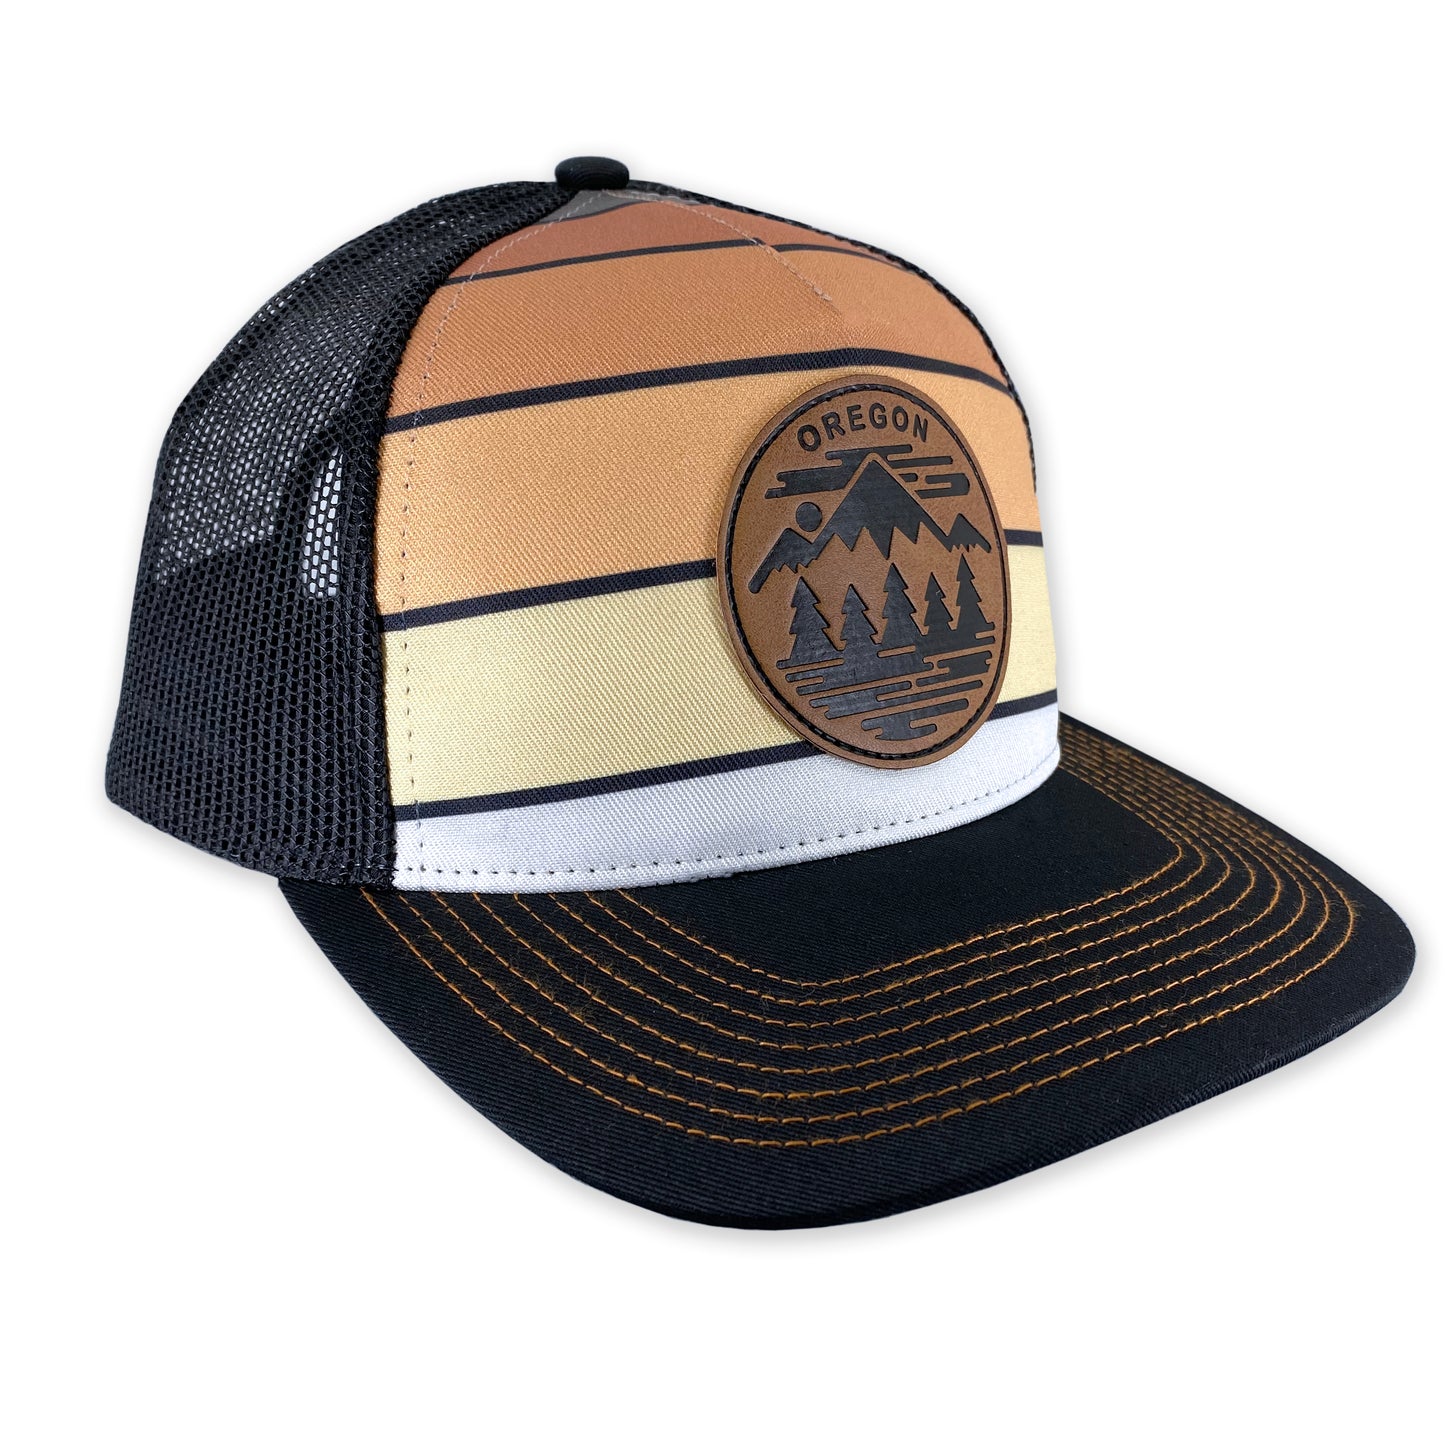 Oregon Fifty Ranges | Curved bill snapback